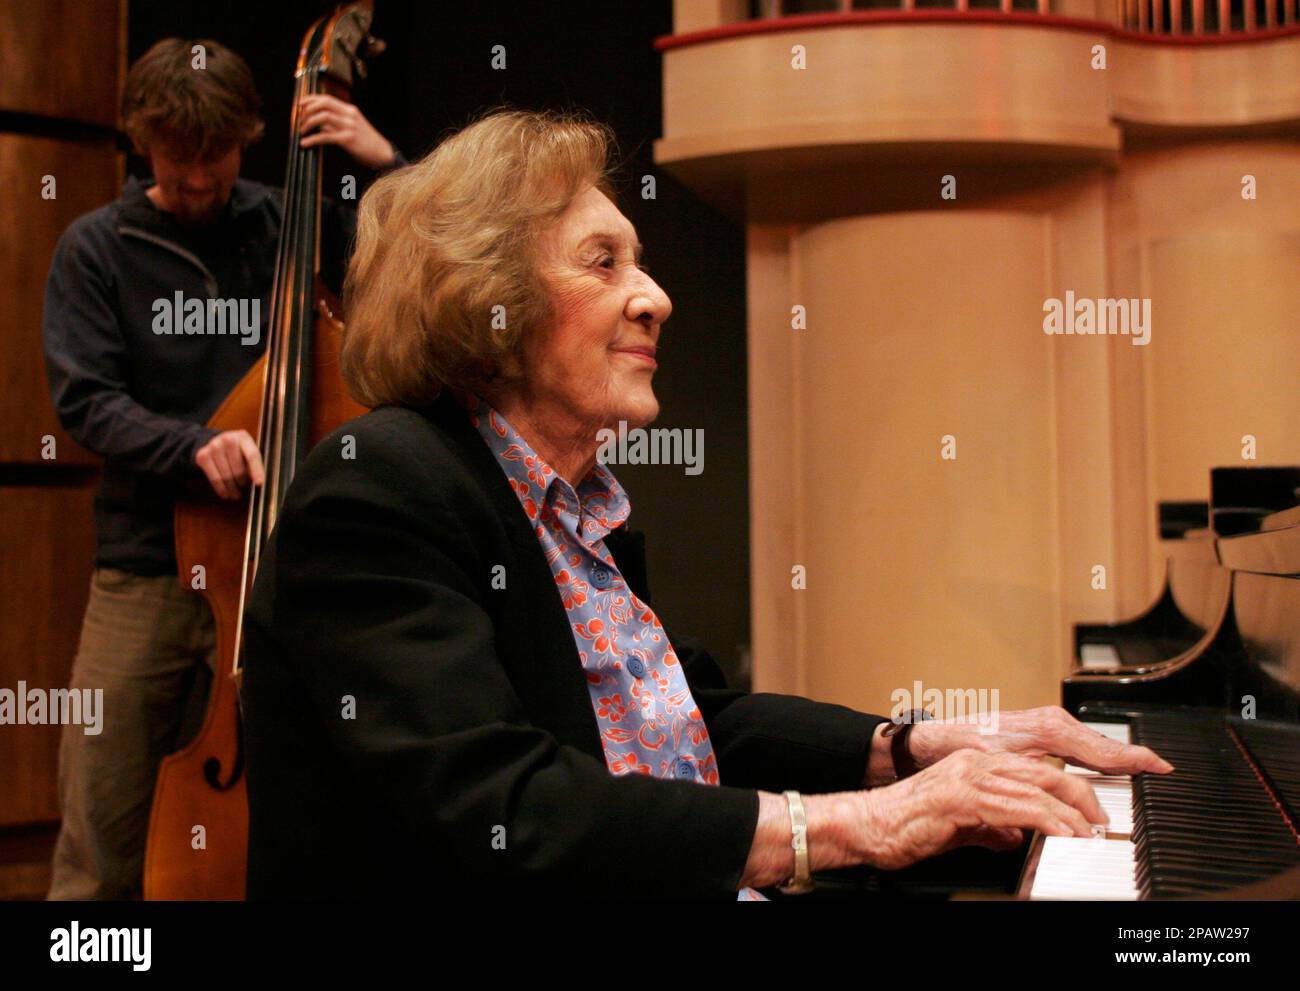 Jazz pianist and host of "Piano Jazz" on National Public Radio, Marian  McPartland performs with students at the University of South Carolina,  during a master class in the School of Music, Tuesday,